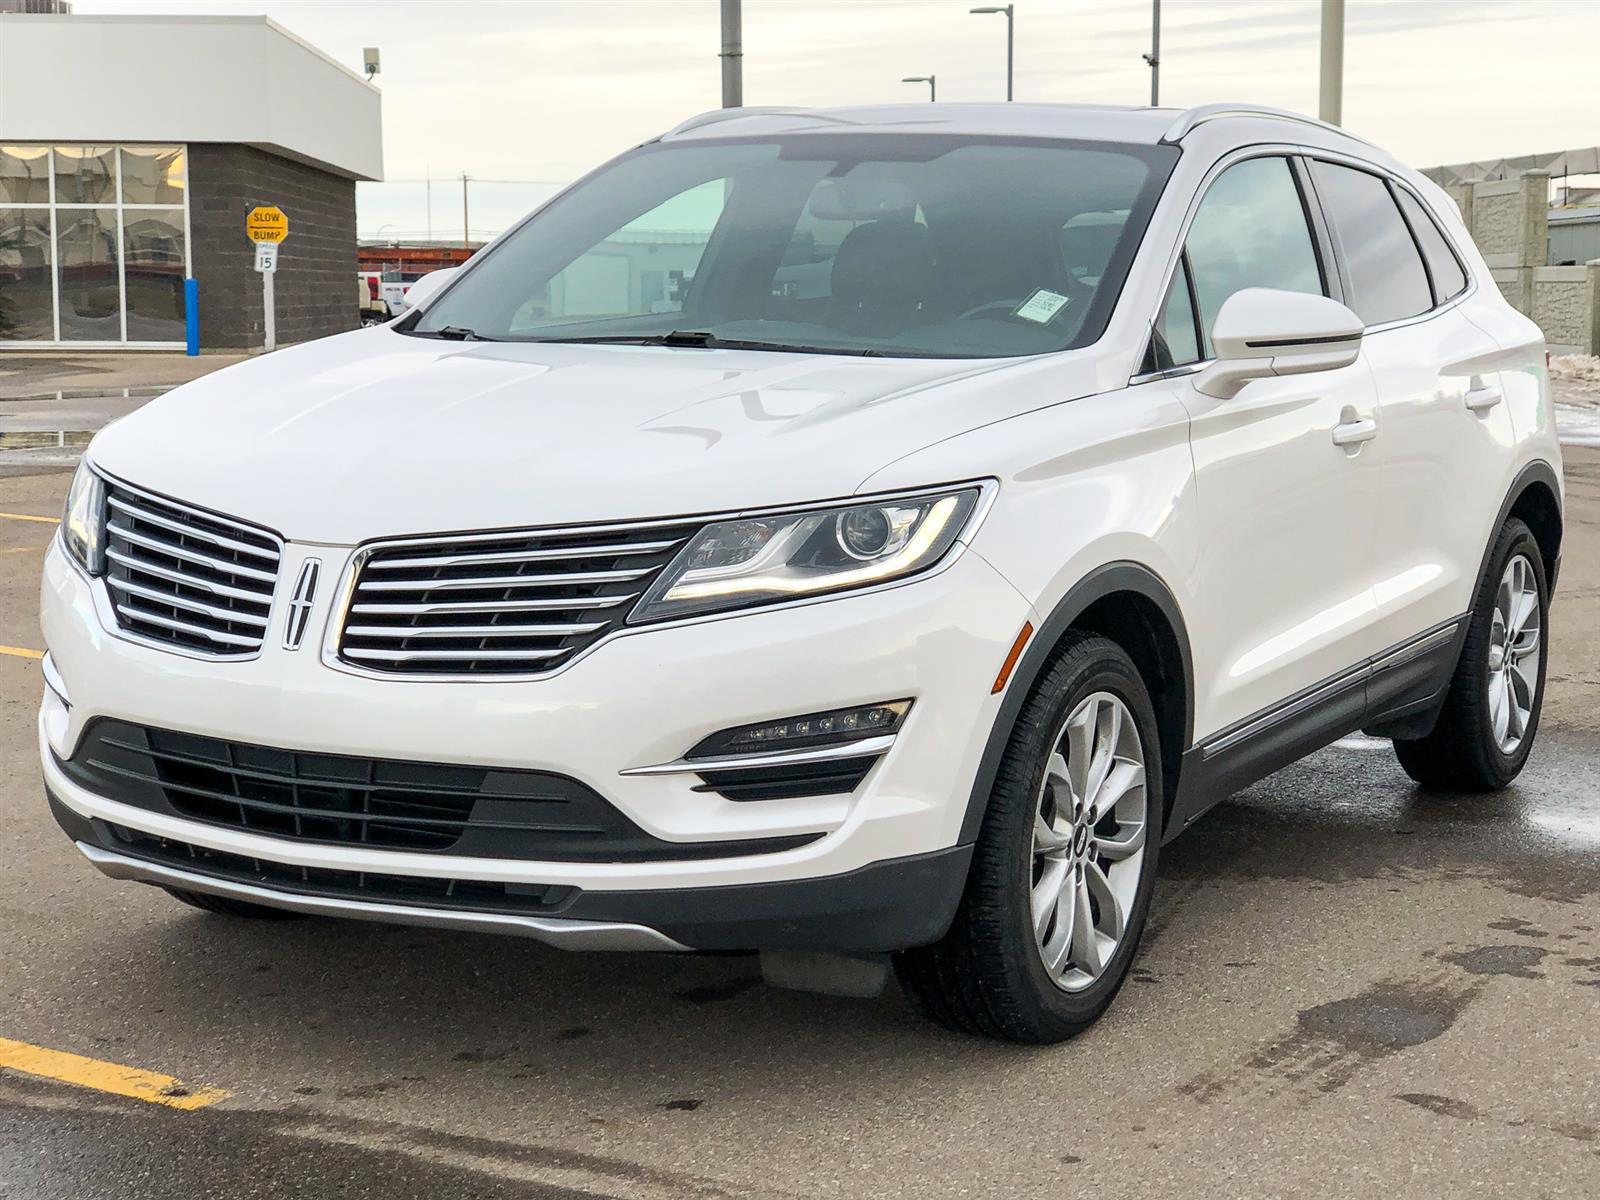 2015 Lincoln MKC 2.0L I4 ECOBOOST | AWD | HEATED FRONT SEATS | NAV | PANORAMIC RO